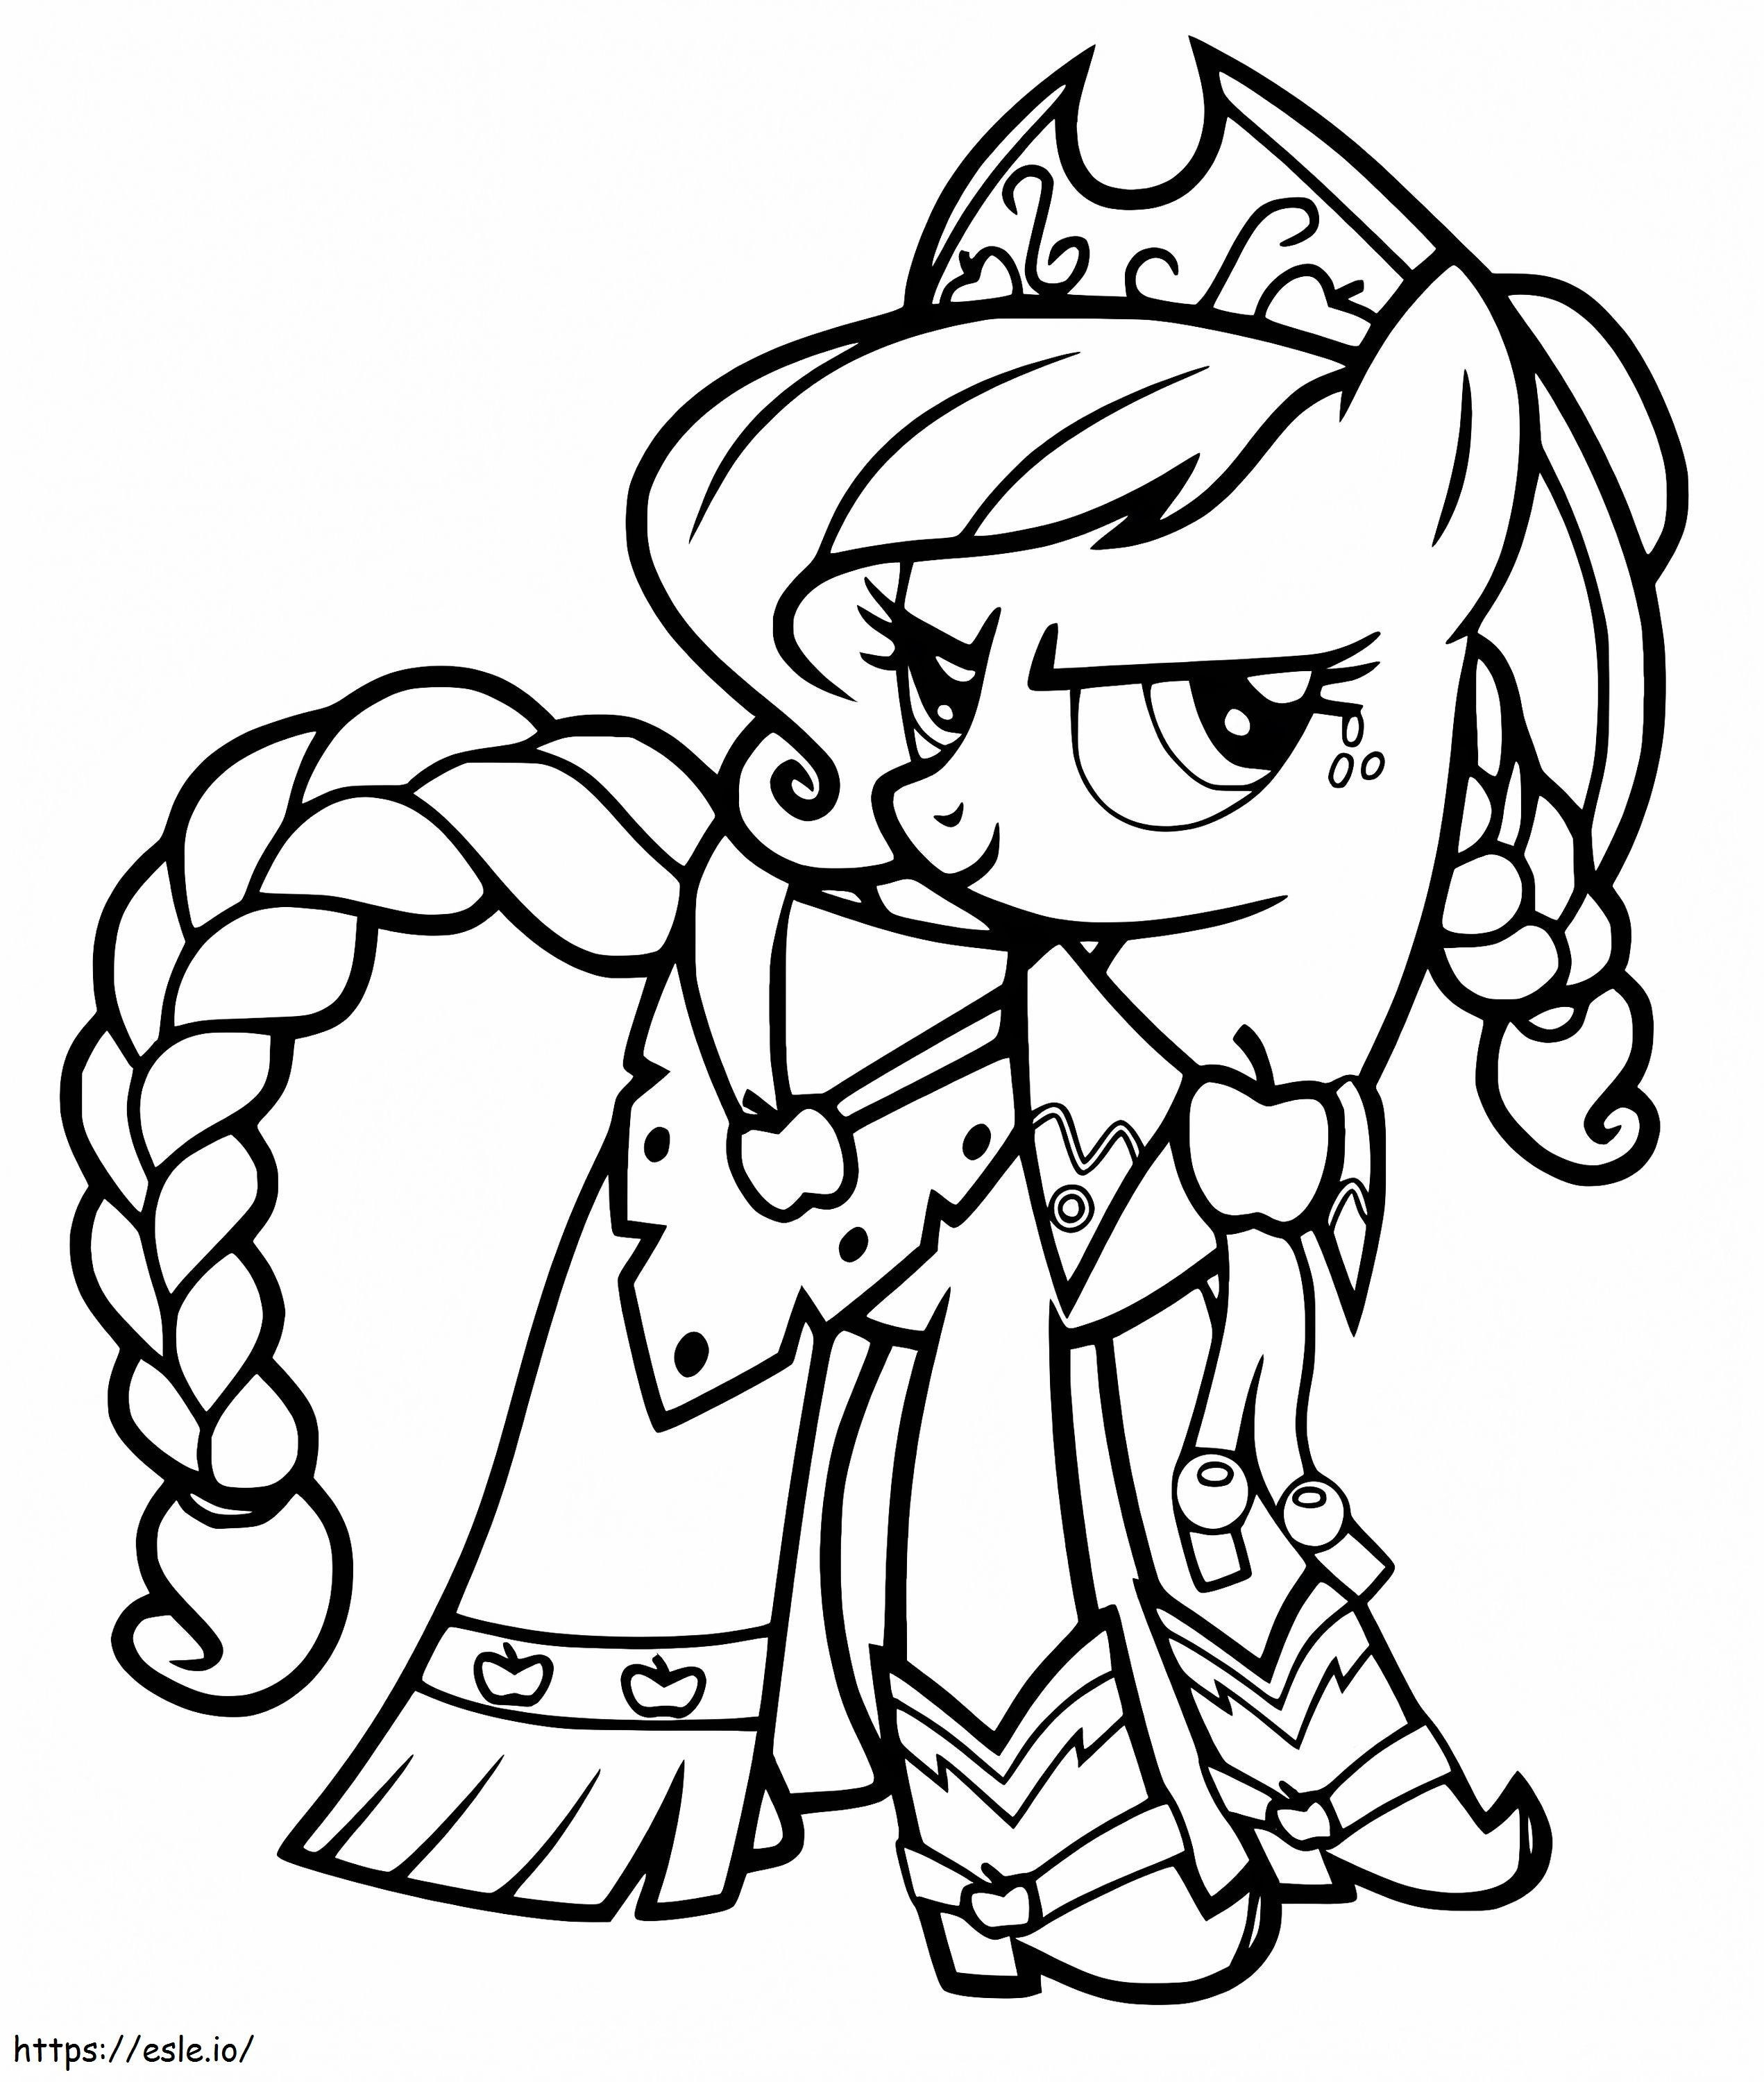 Awesome Applejack coloring page